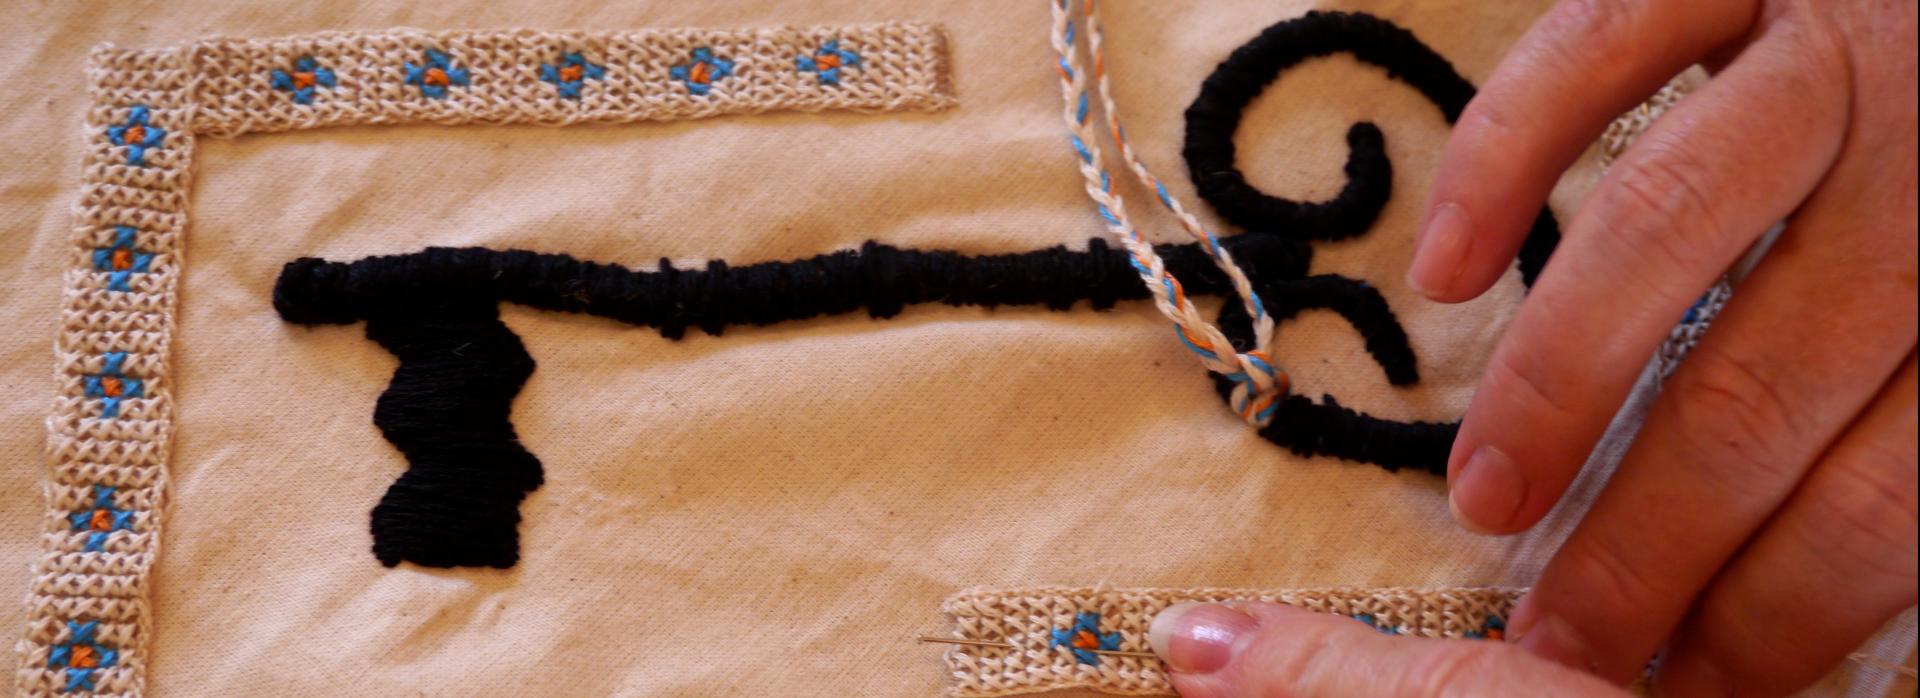 a close-up of two hands working on an embroidery of a key